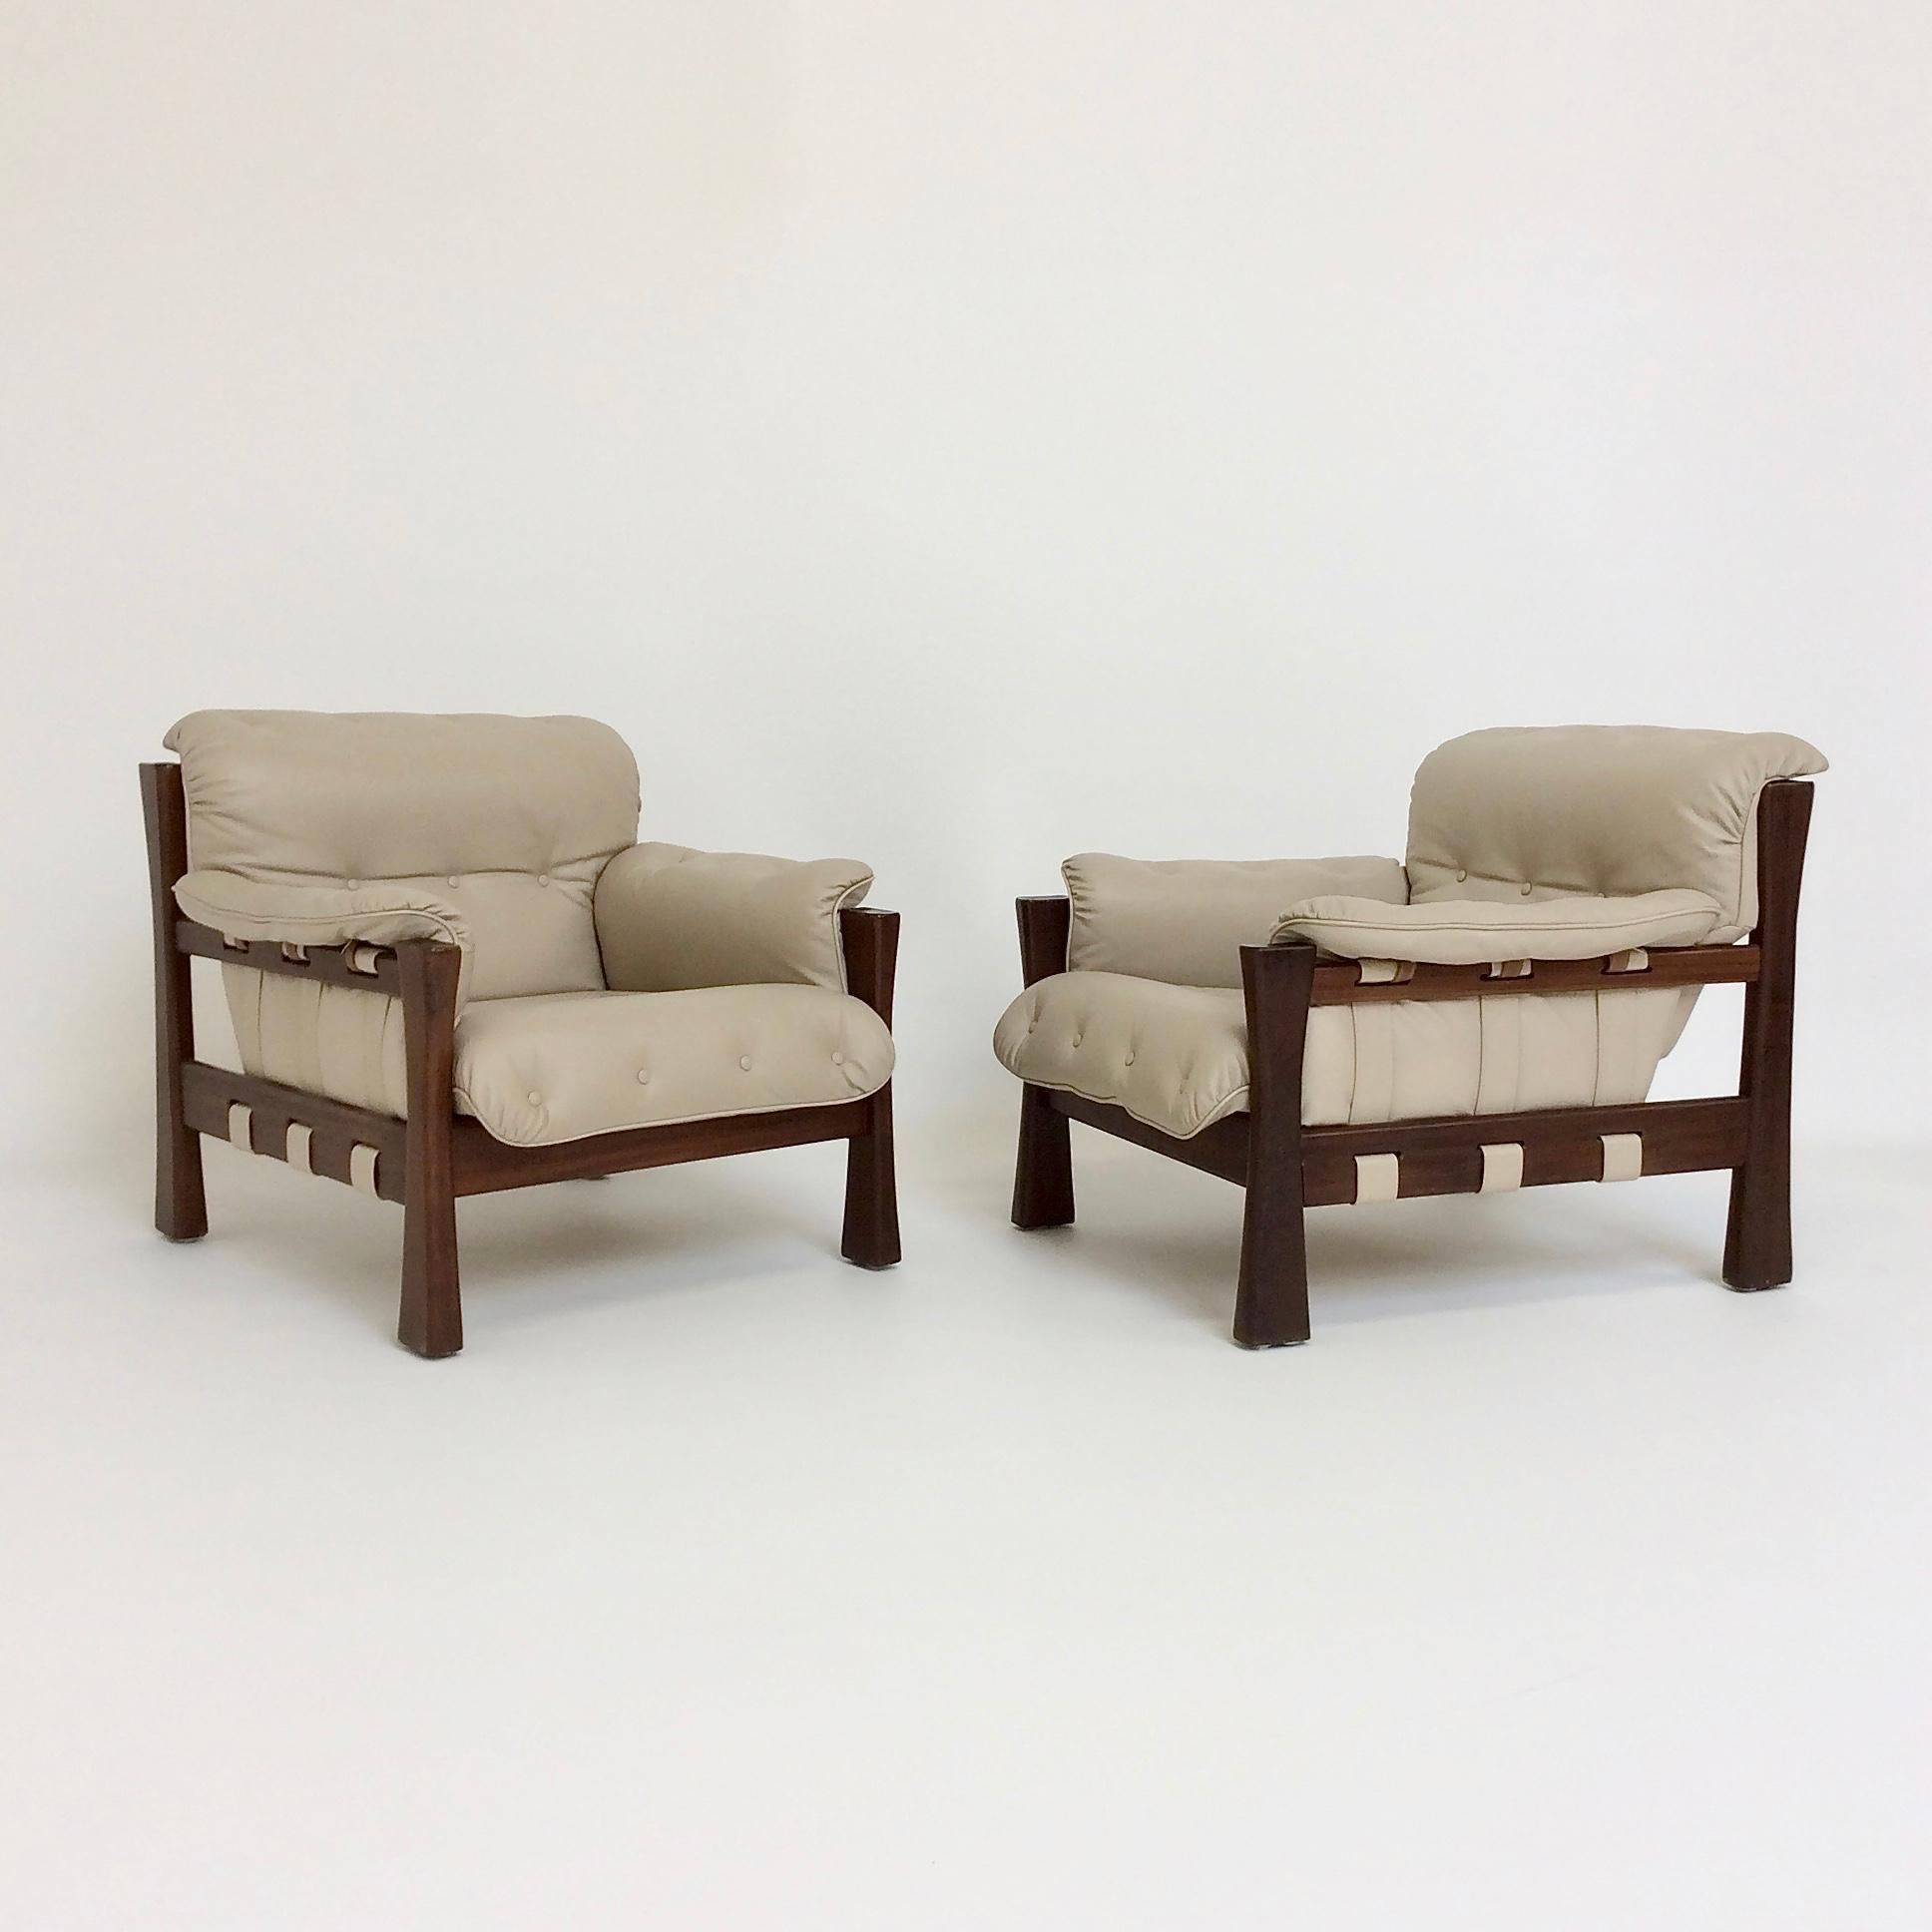 Nice pair of armchairs, circa 1970, Brazil
Light grey leather, solid dark wood.
Dimensions: 73 cm H, 80 cm W, 90 cm D, seat height 40 cm.
Good original condition.
All purchases are covered by our Buyer Protection Guarantee.
This item can be returned